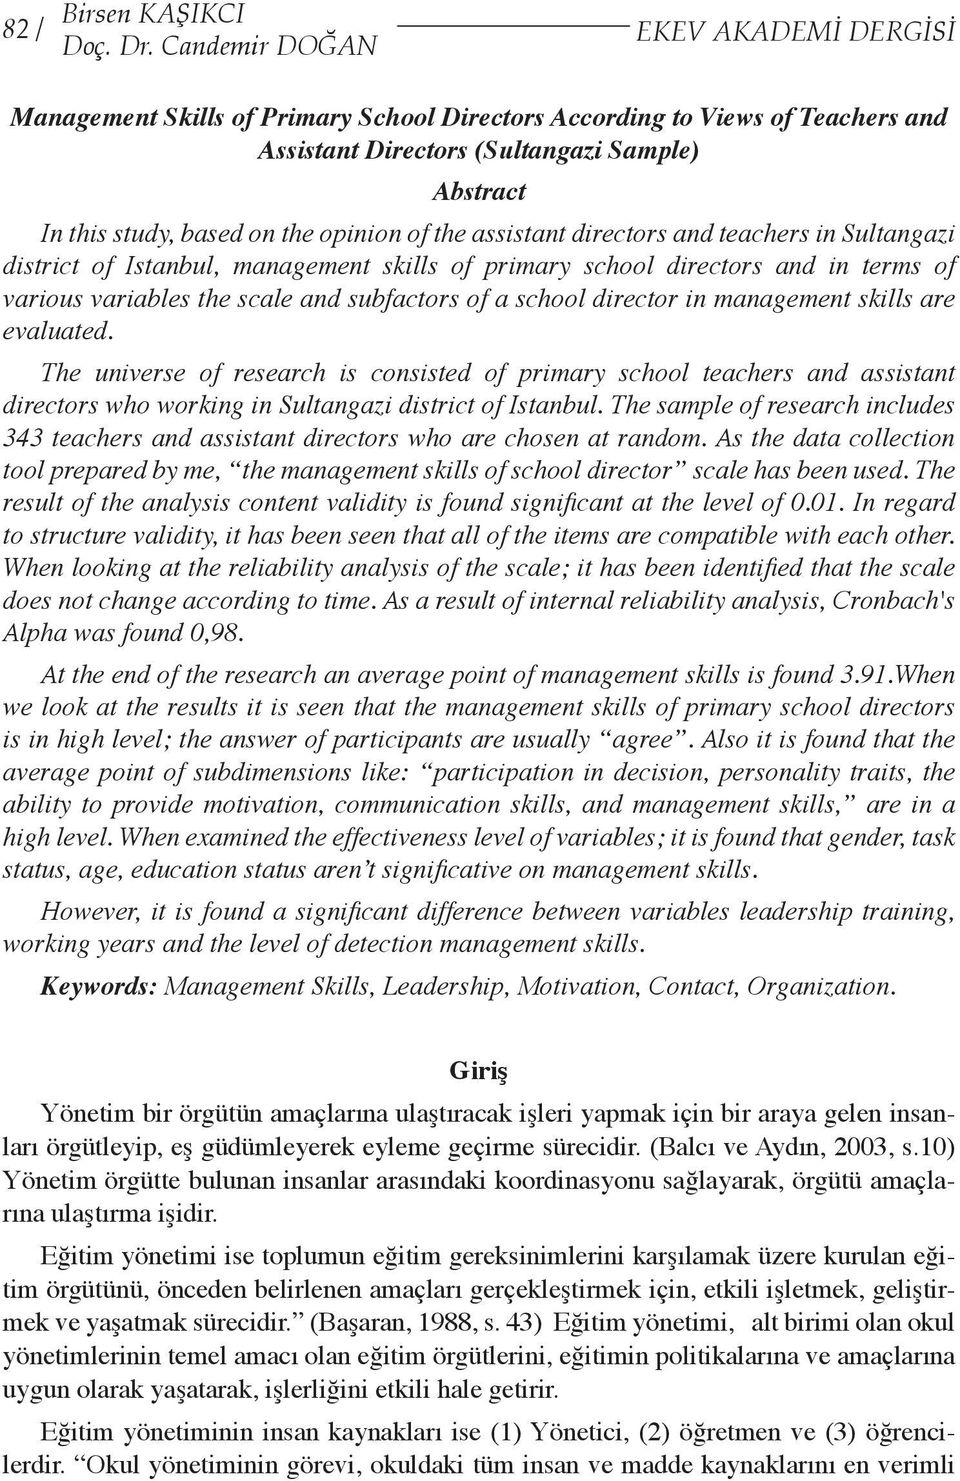 opinion of the assistant directors and teachers in Sultangazi district of Istanbul, management skills of primary school directors and in terms of various variables the scale and subfactors of a